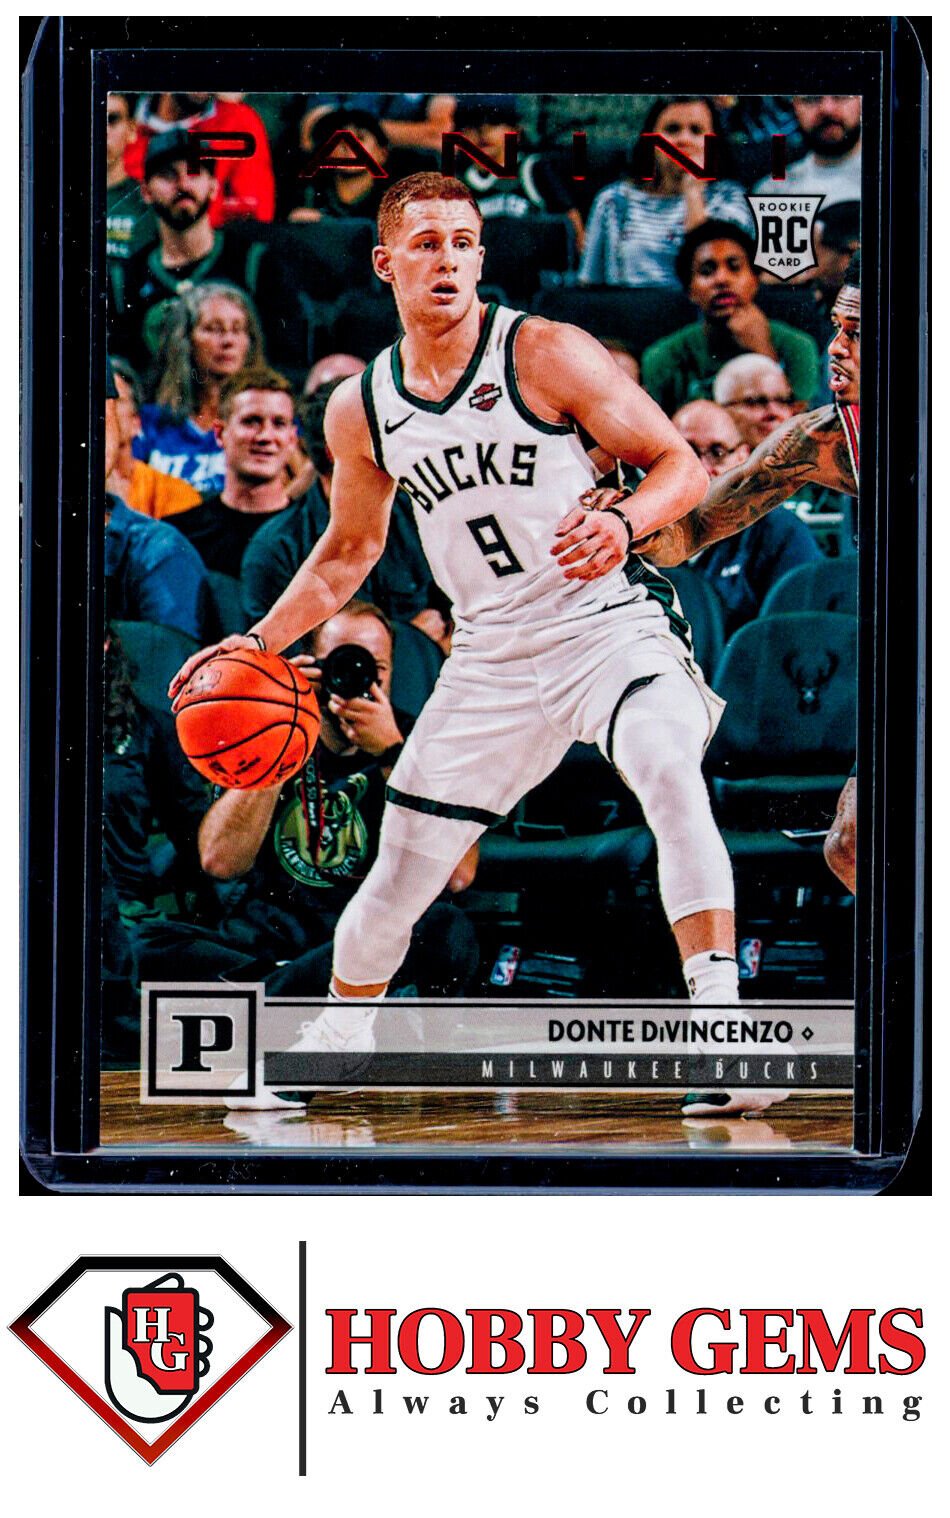 DONTE DIVINCENZO 2018-19 Panini Chronicles RC Base Red 25/149 #114 Basketball Parallel Serial Numbered - Hobby Gems